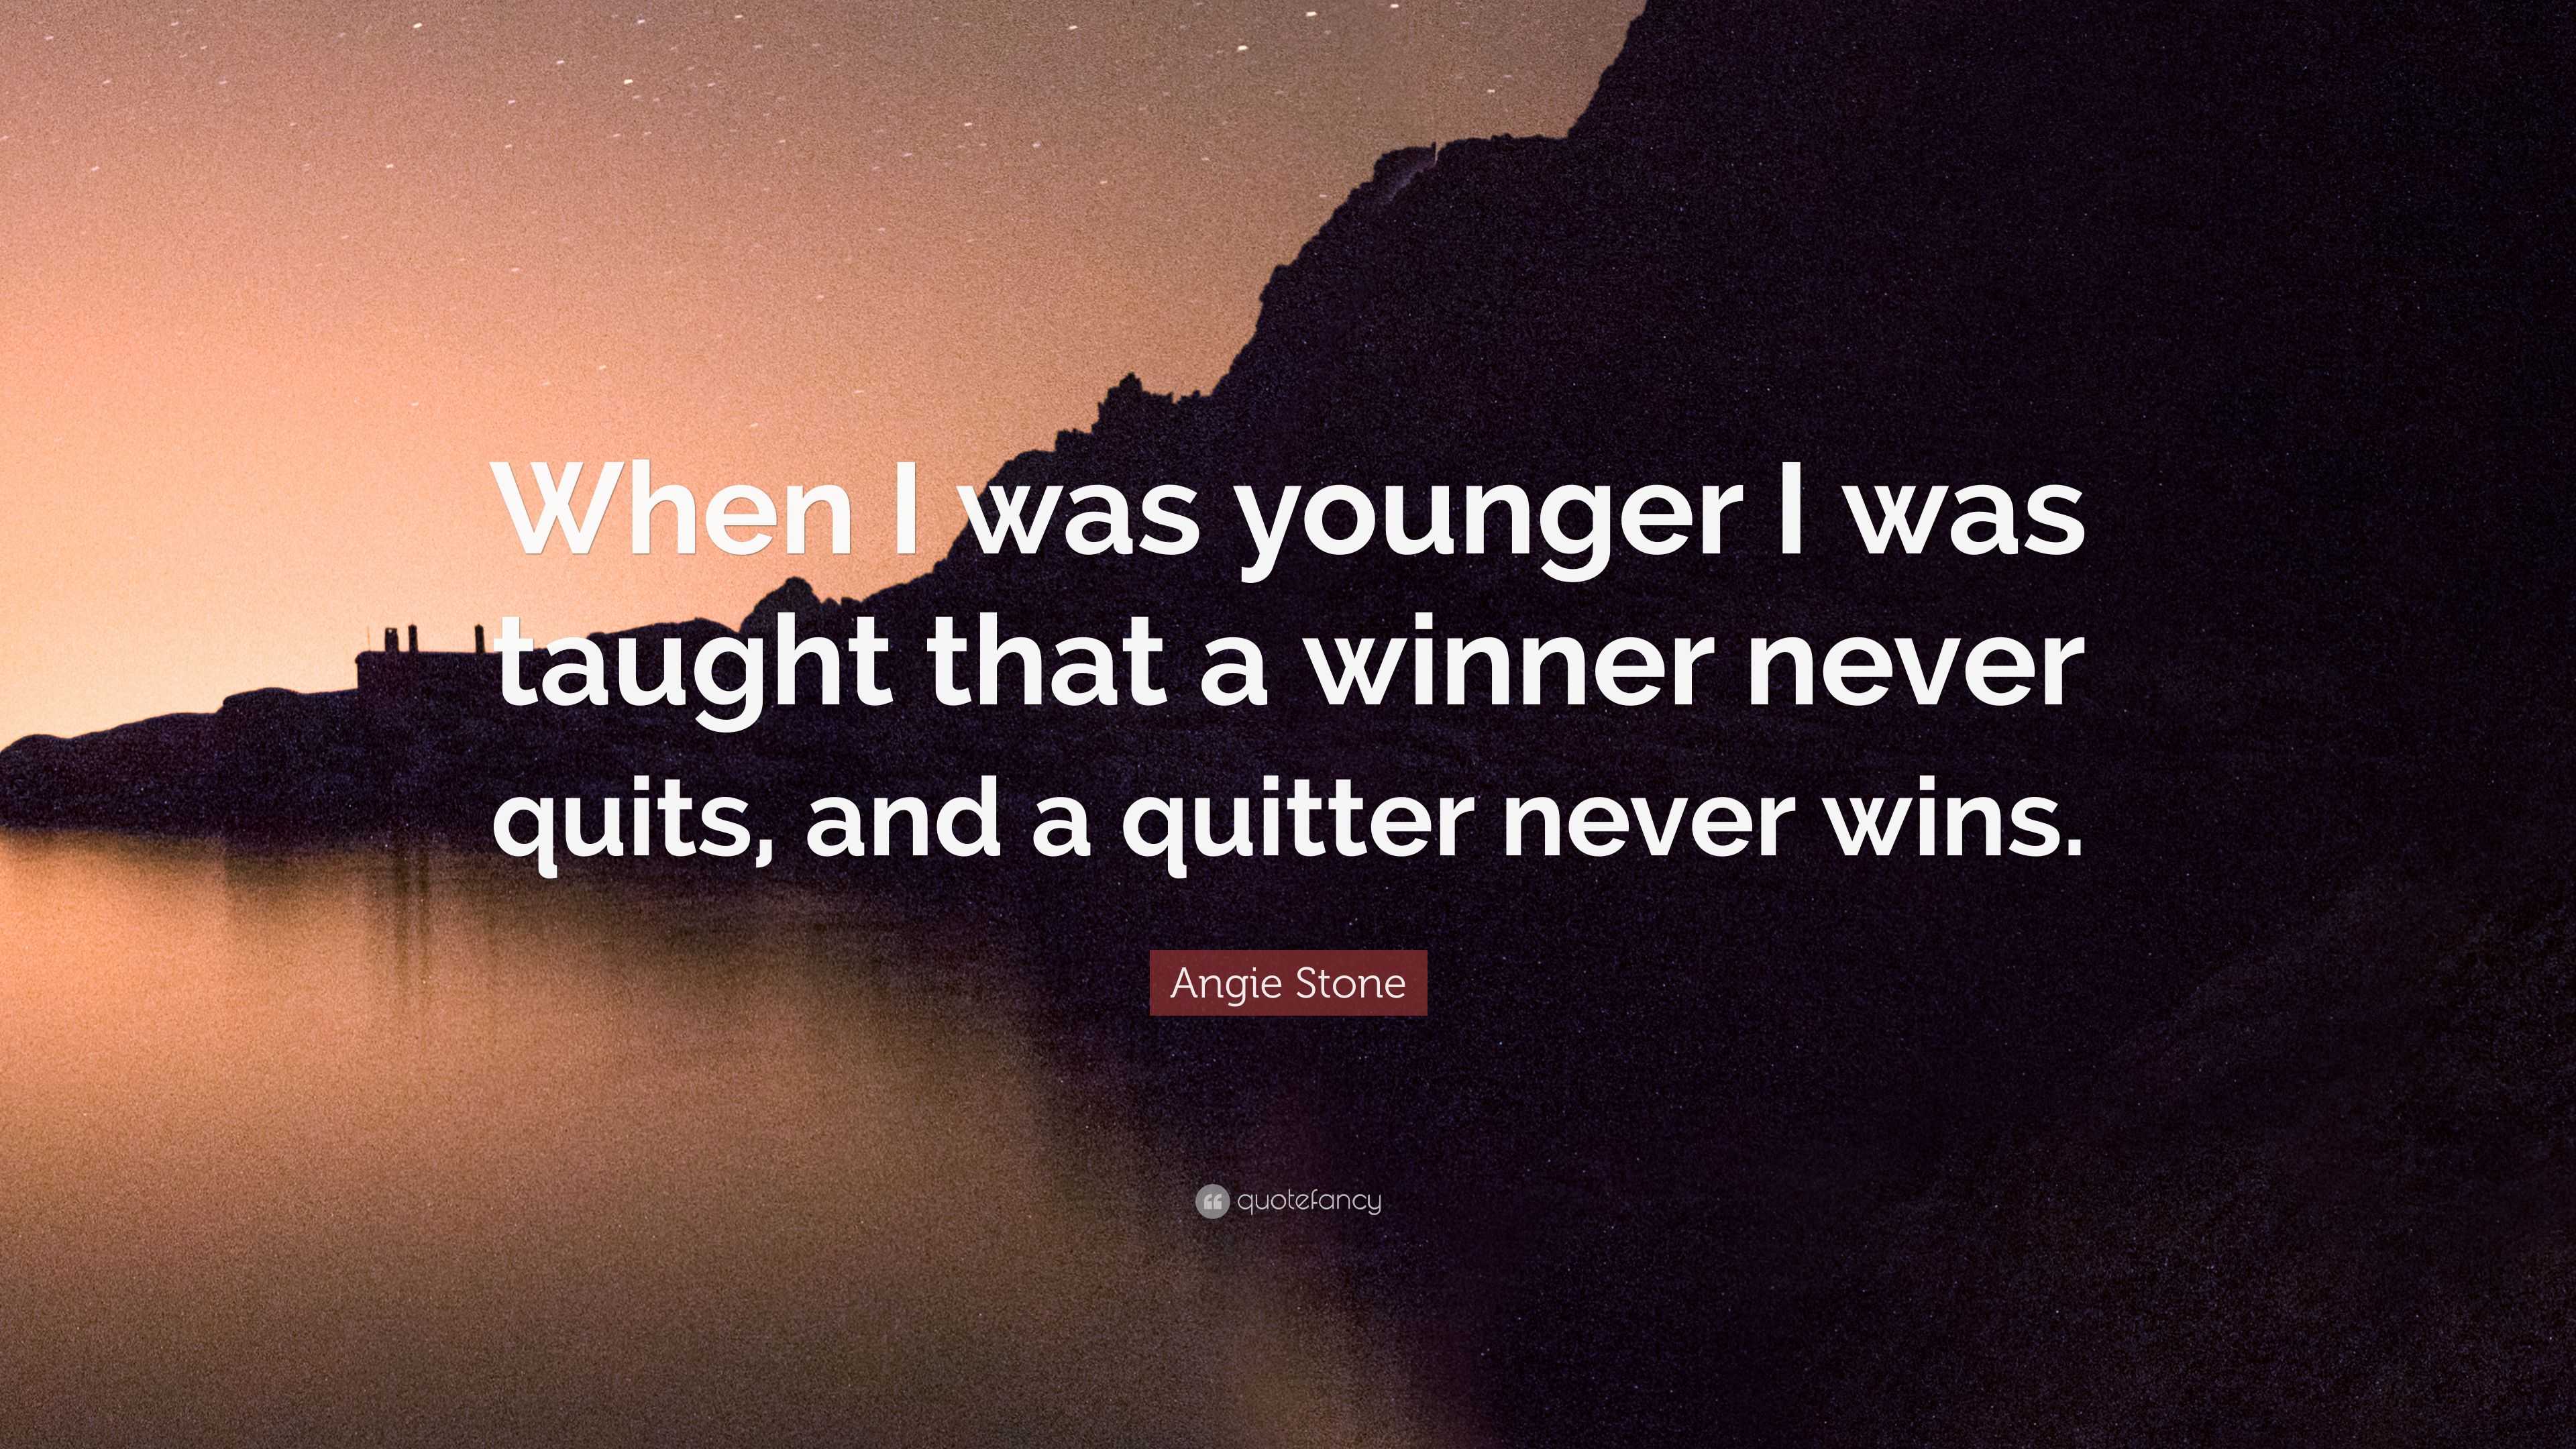 a quitter never wins and a winner never quits amazon